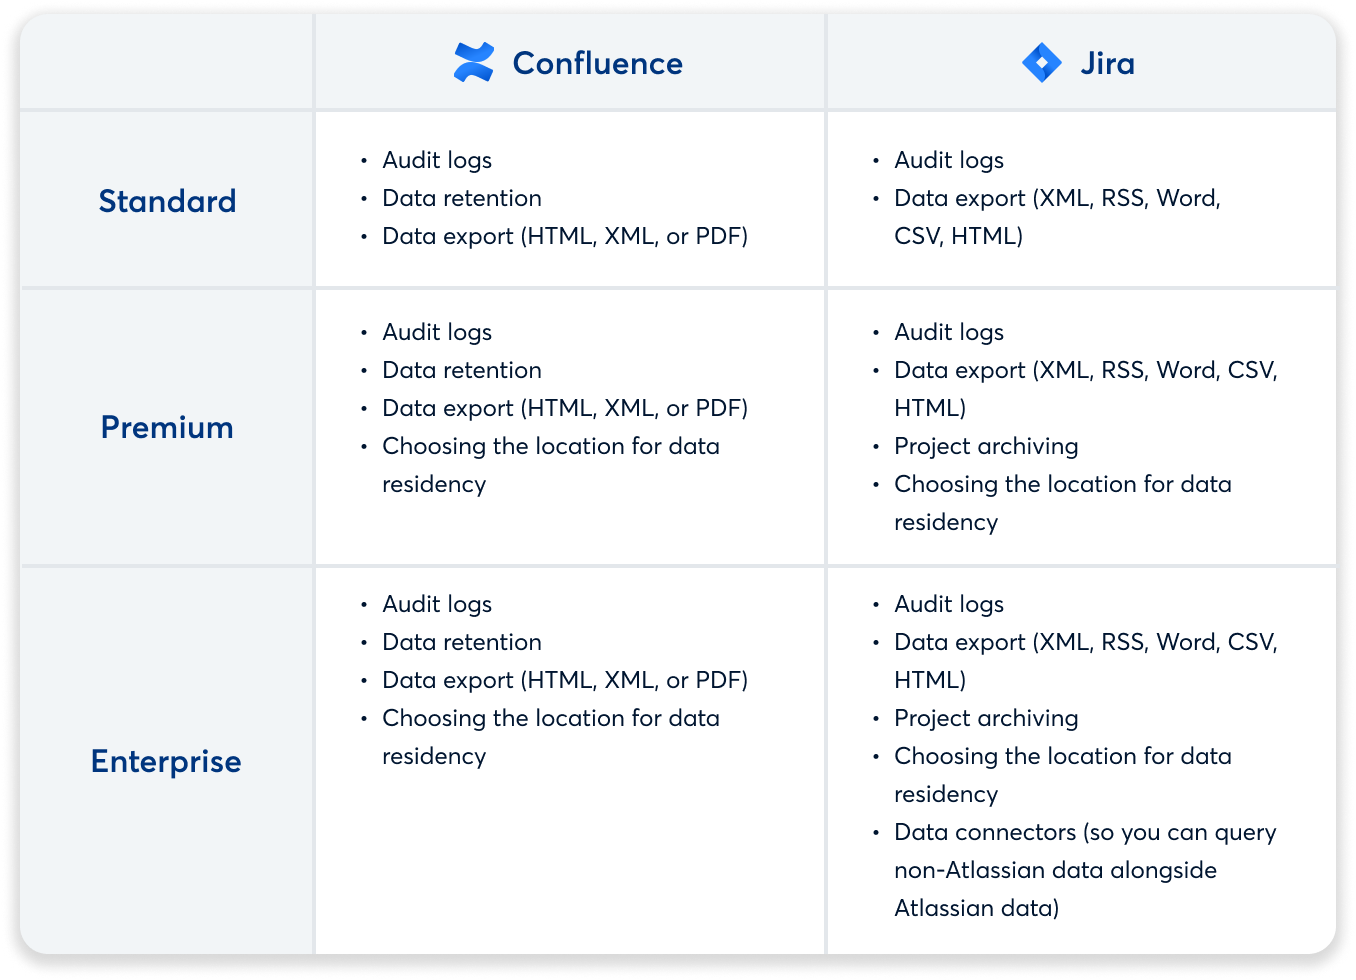 Comparison of Confluence and Jira features across plans.